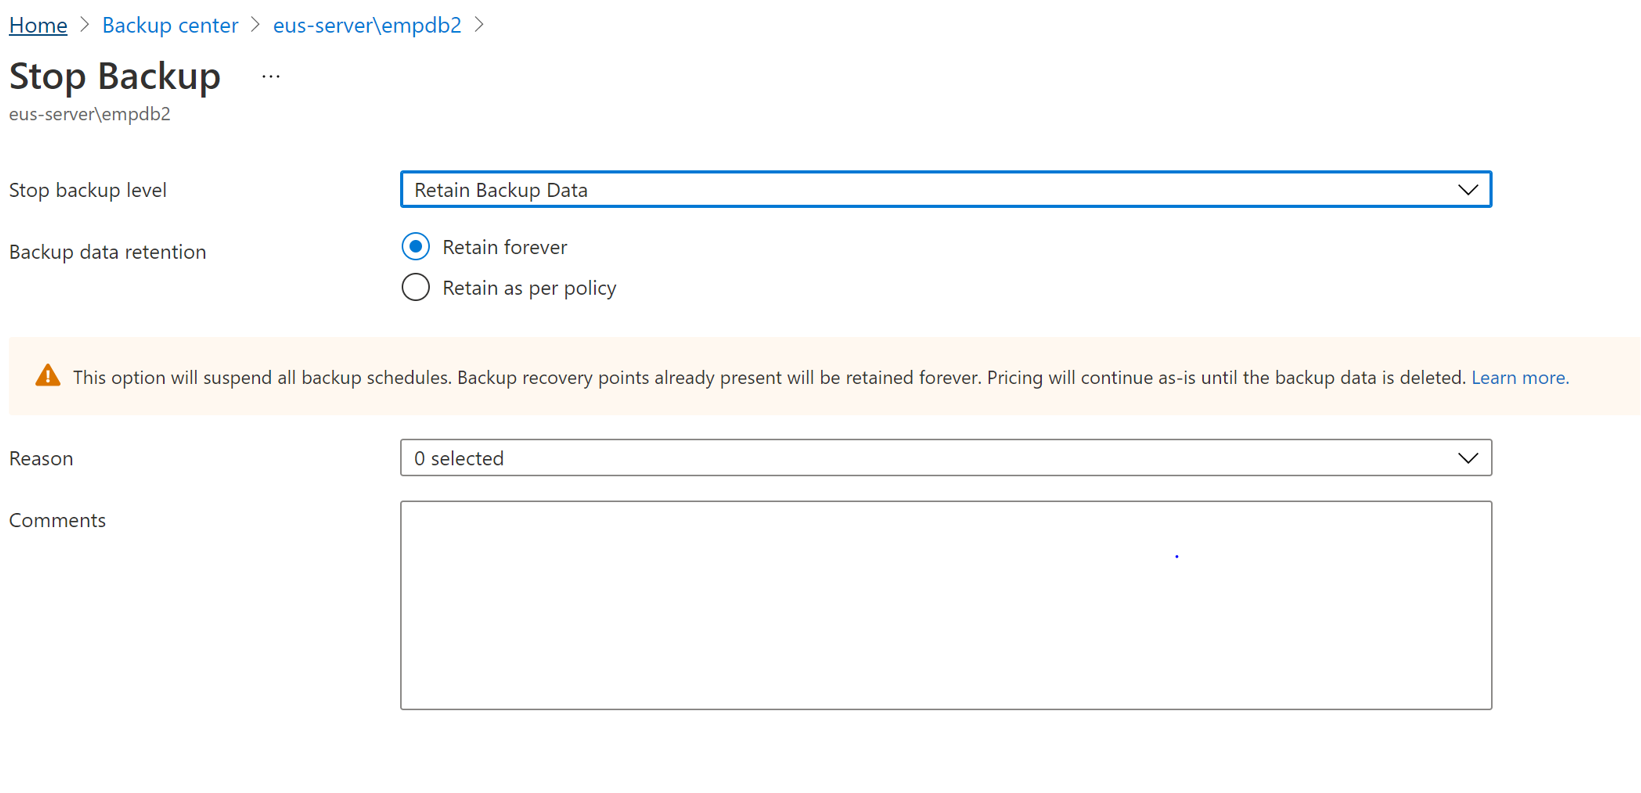 Screenshot showing the options for data retention to be selected.